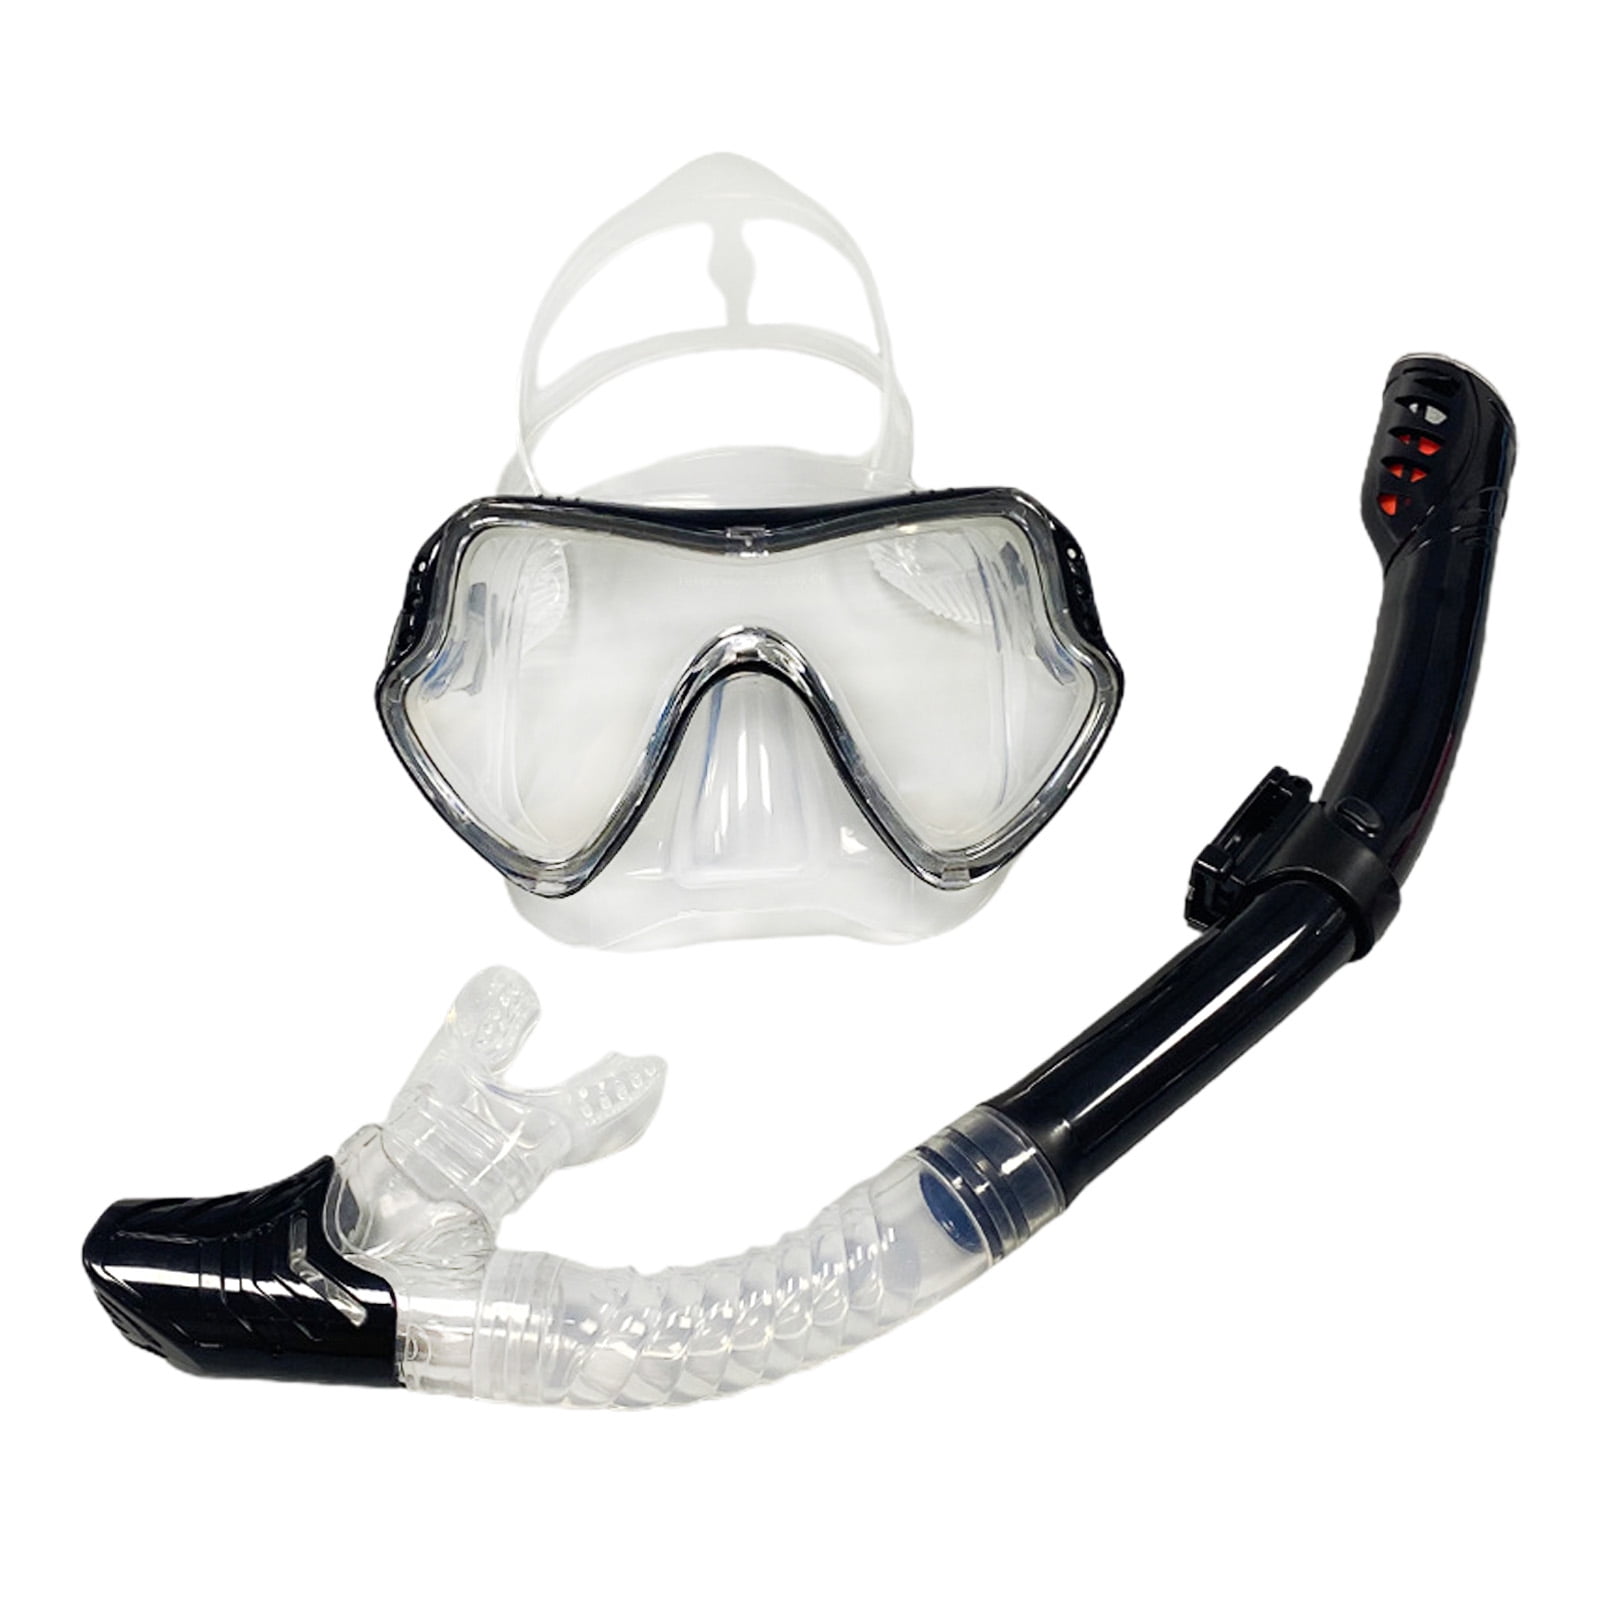 Full Face Mask Swimming Dry Diving Goggle Snorkel Scuba Anti-Fog Glass New USA 